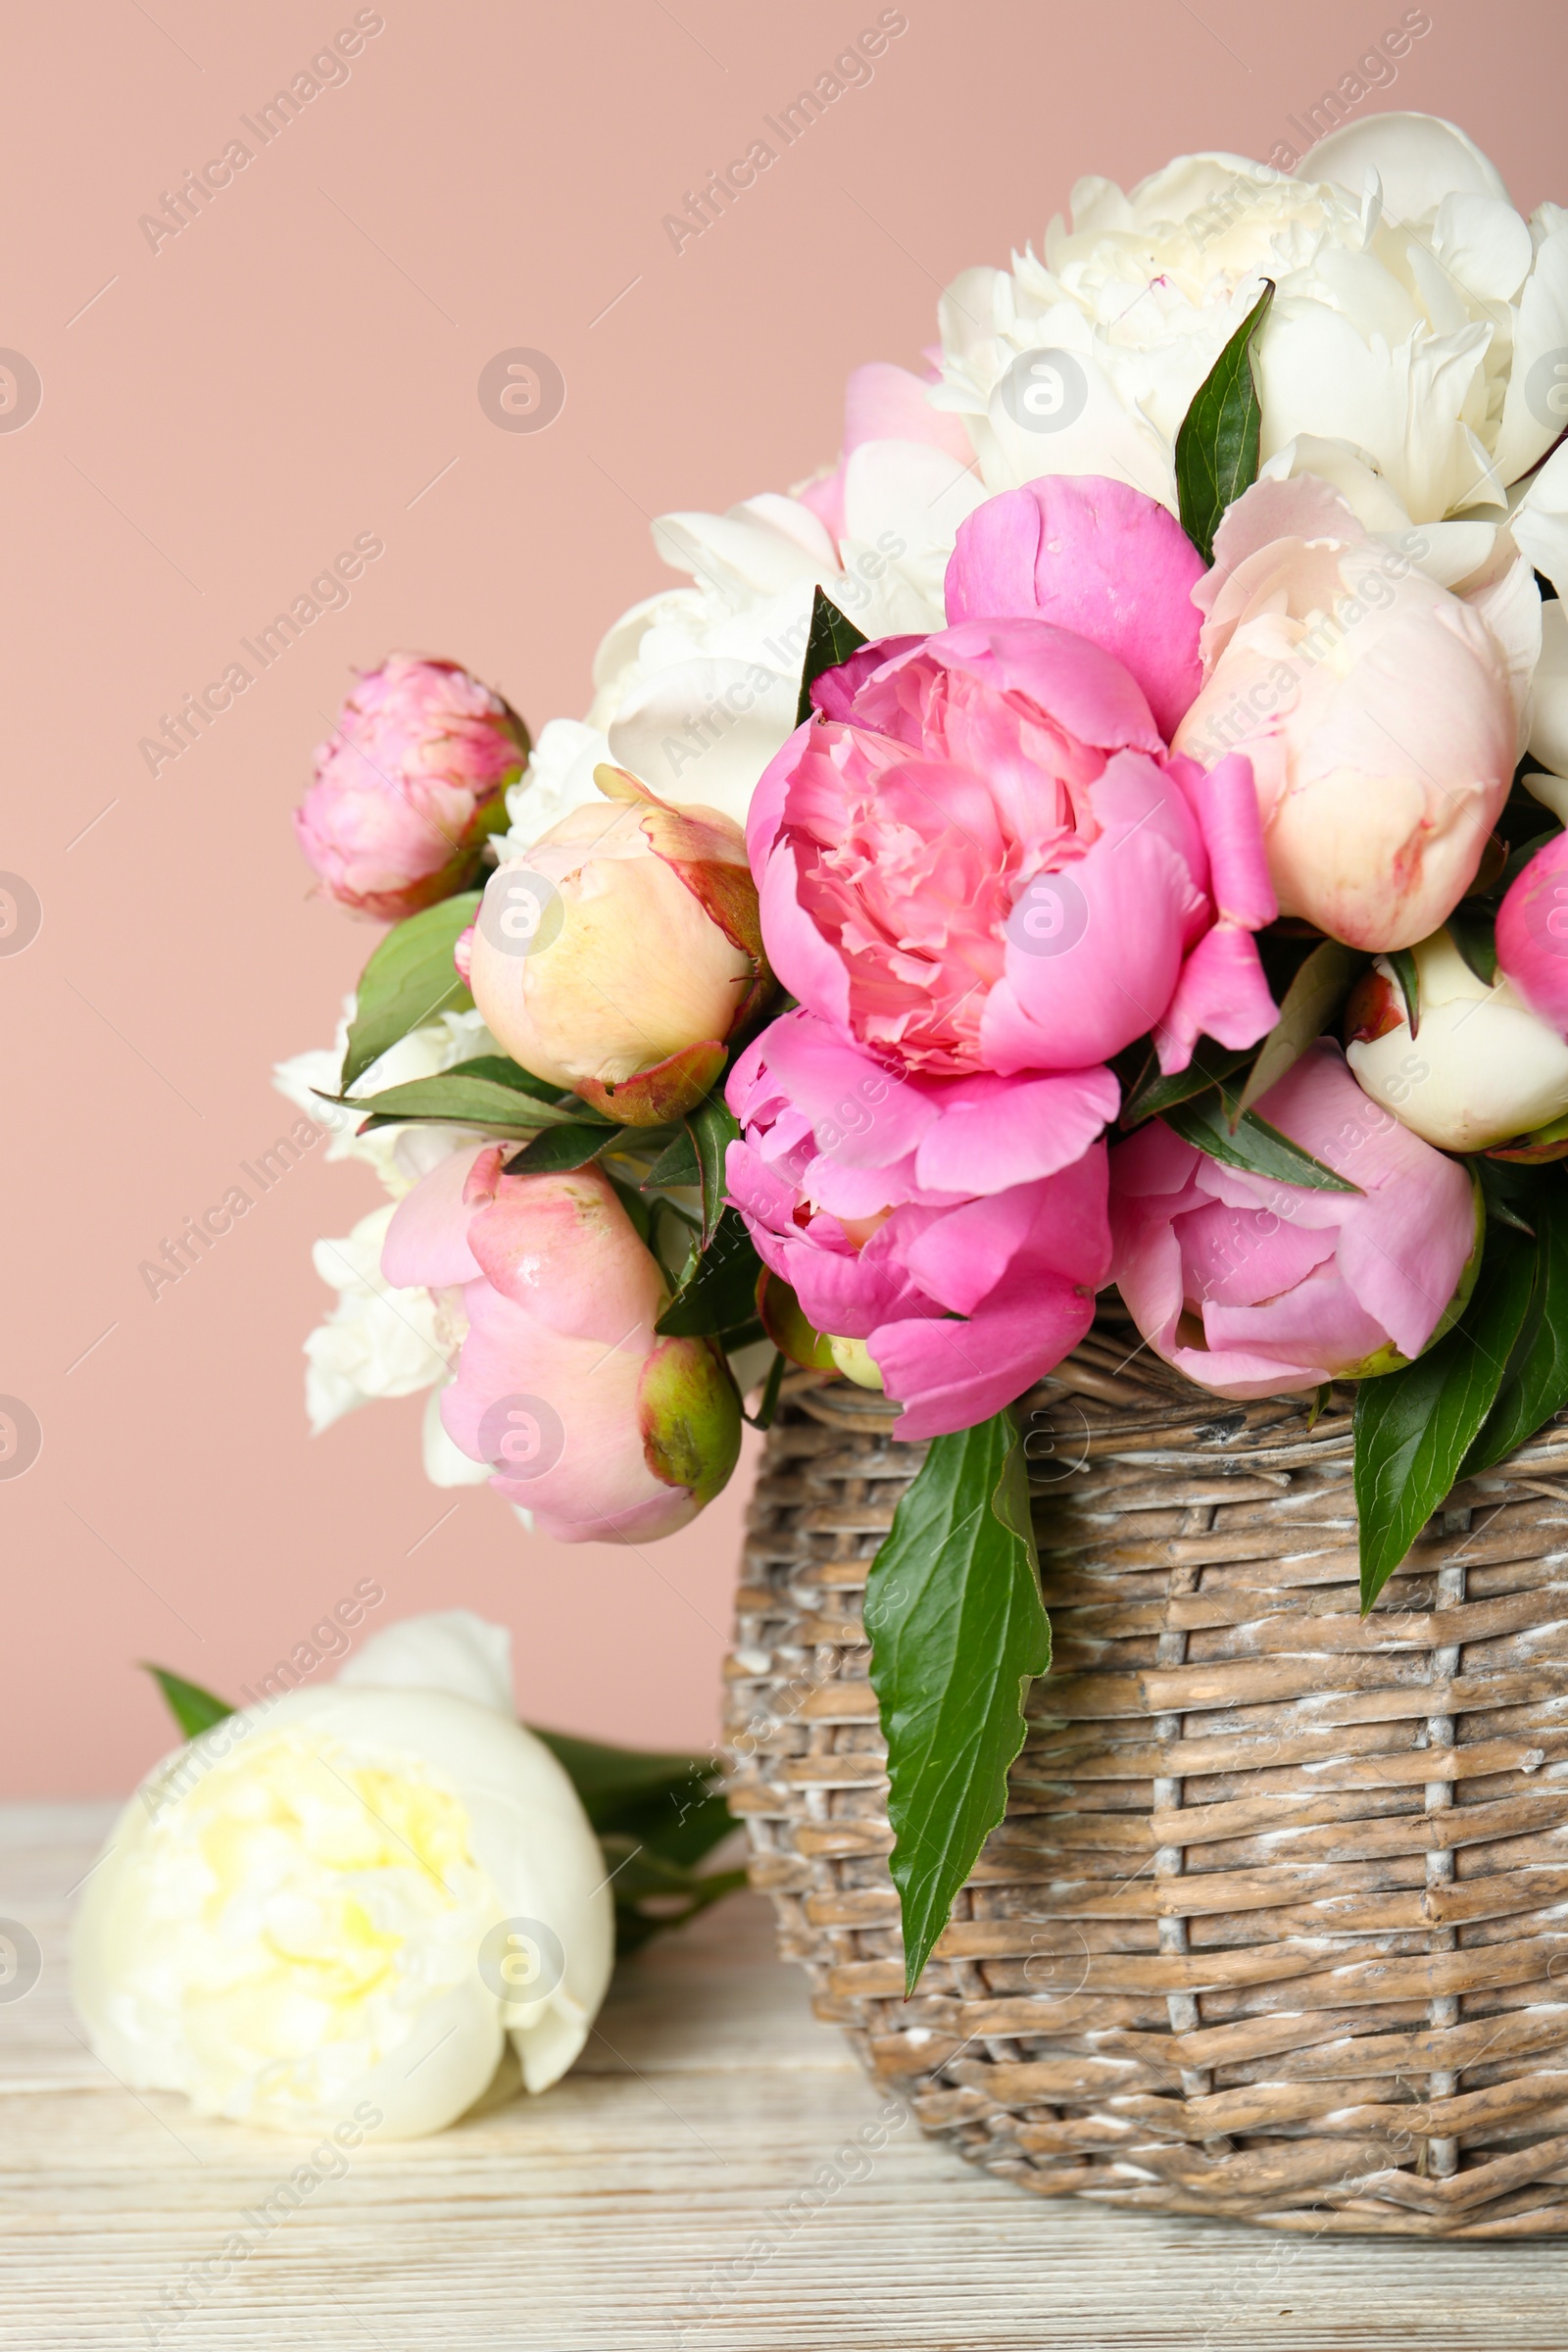 Photo of Basket with beautiful peonies on wooden table